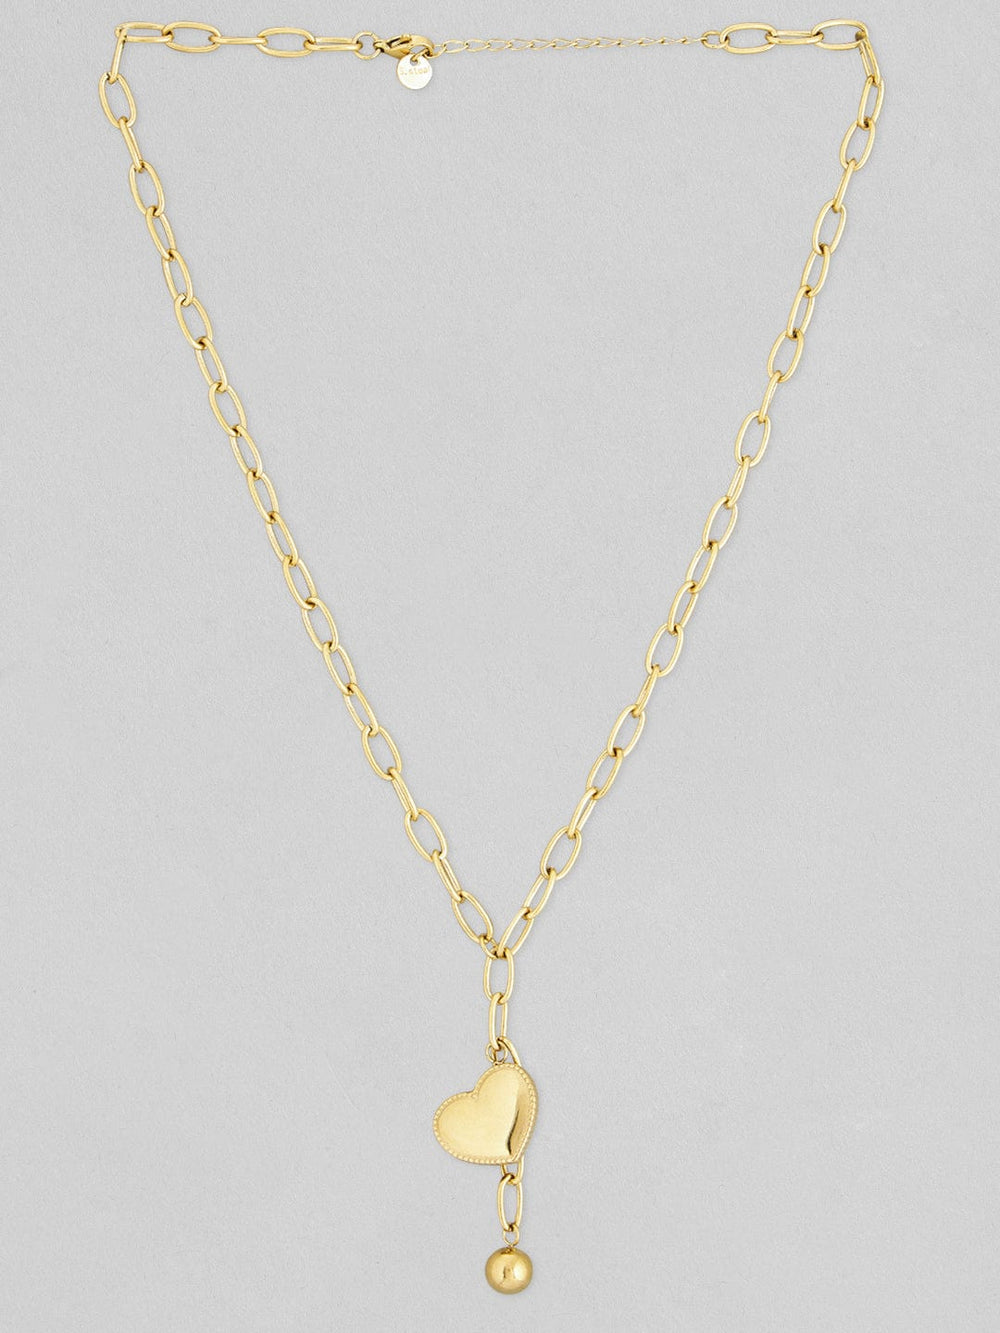 Rubans Voguish 18K Gold-Plated Heart-Shaped Pendant Necklace Chain & Necklaces